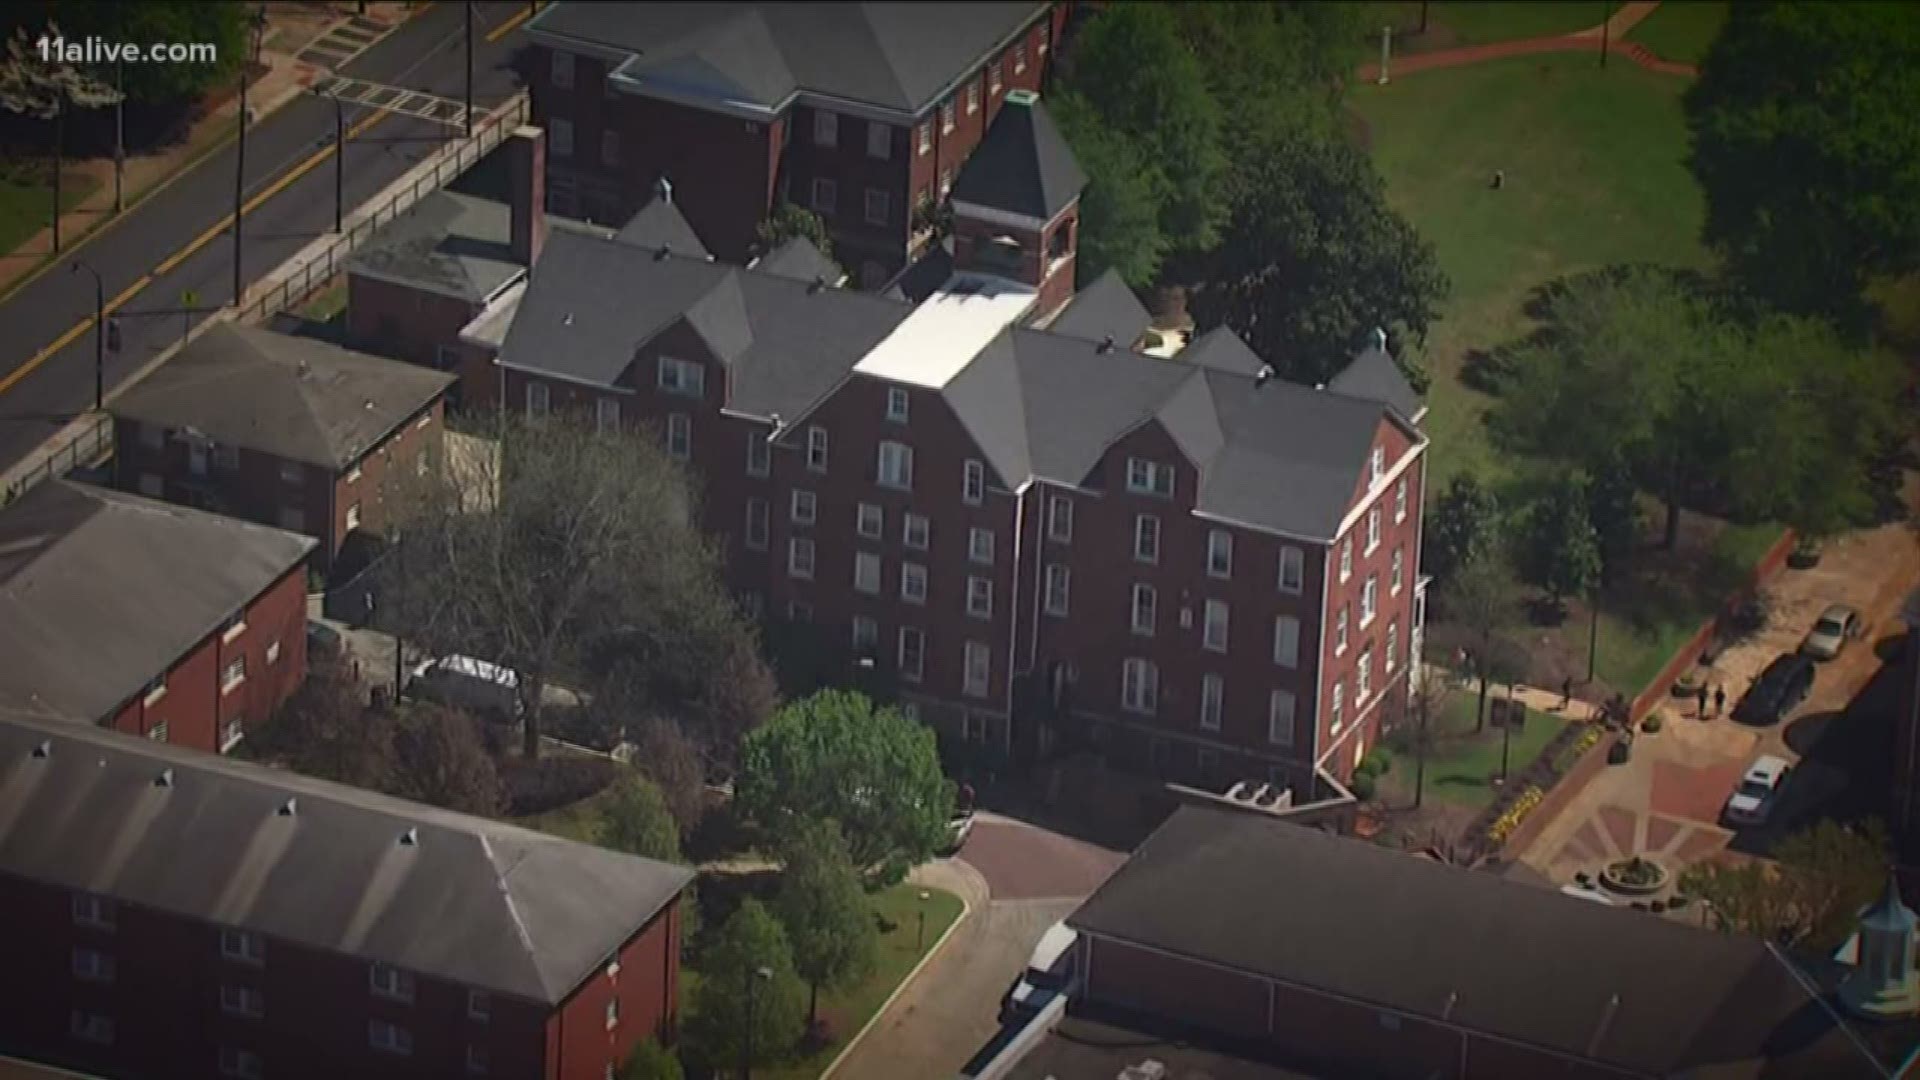 Morehouse College is investigating the claims against DeMarcus Crews, an administrator at the school.